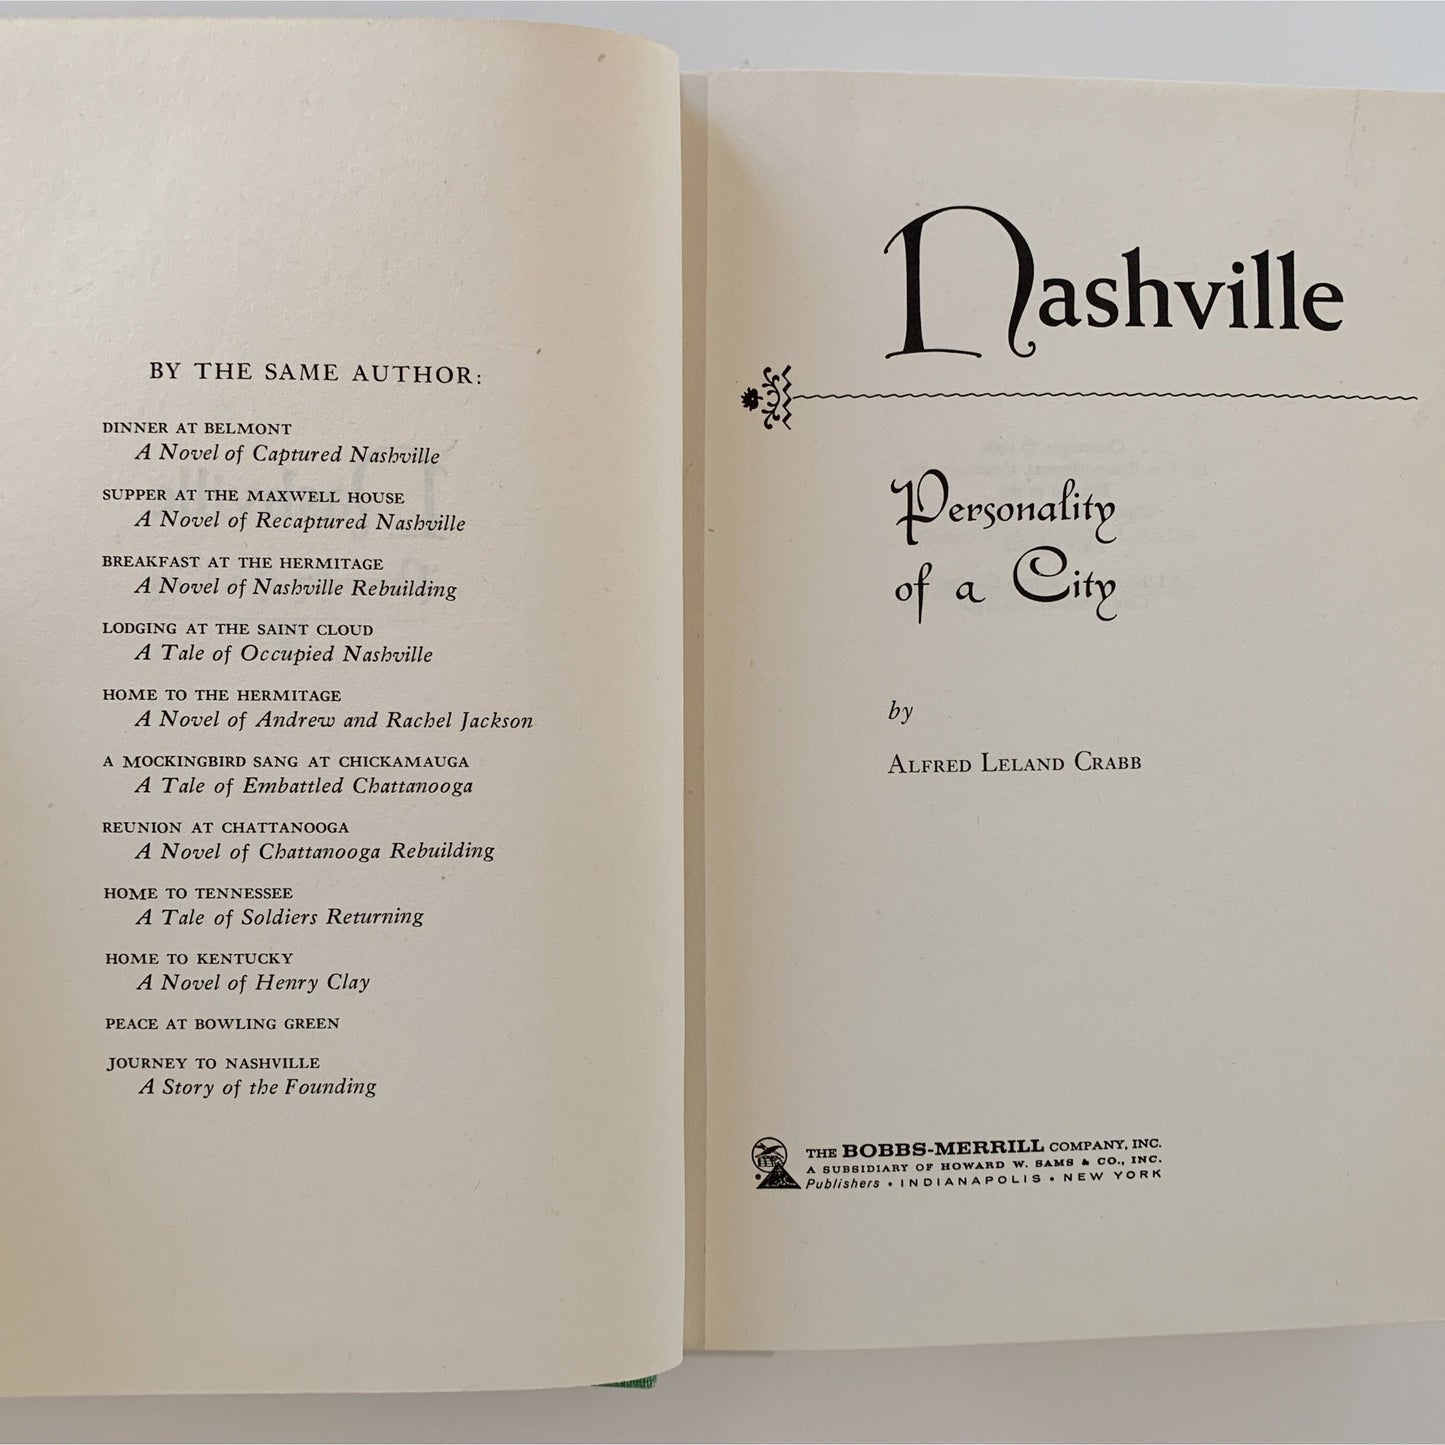 Nashville Personality of a City, First Edition 1960 Hardcover